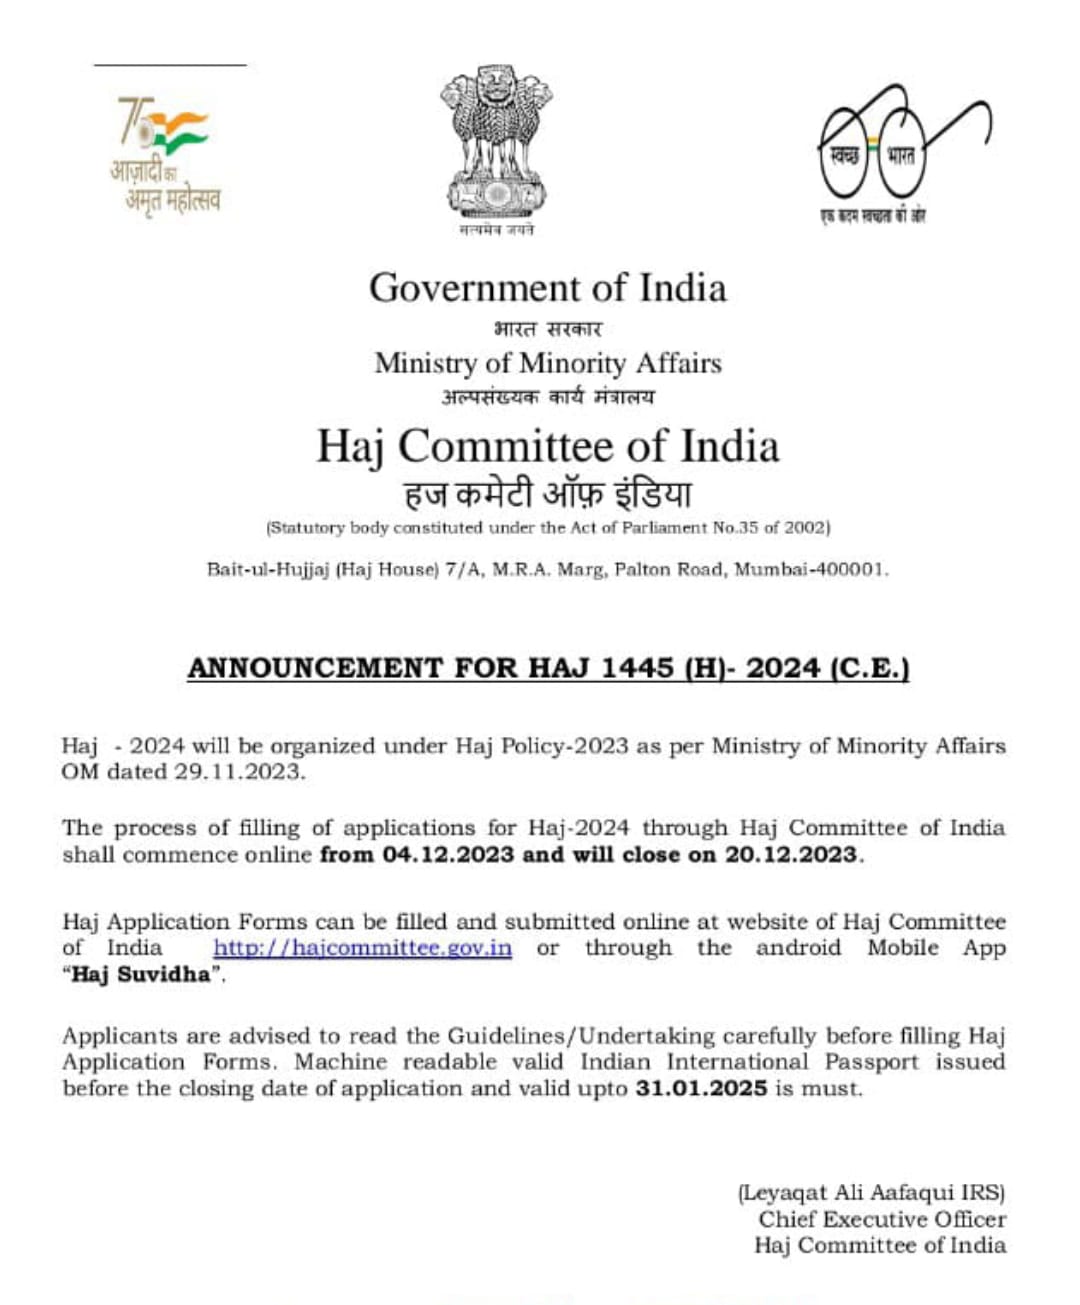 Haj Committee of India Announces Commencement of Haj Application